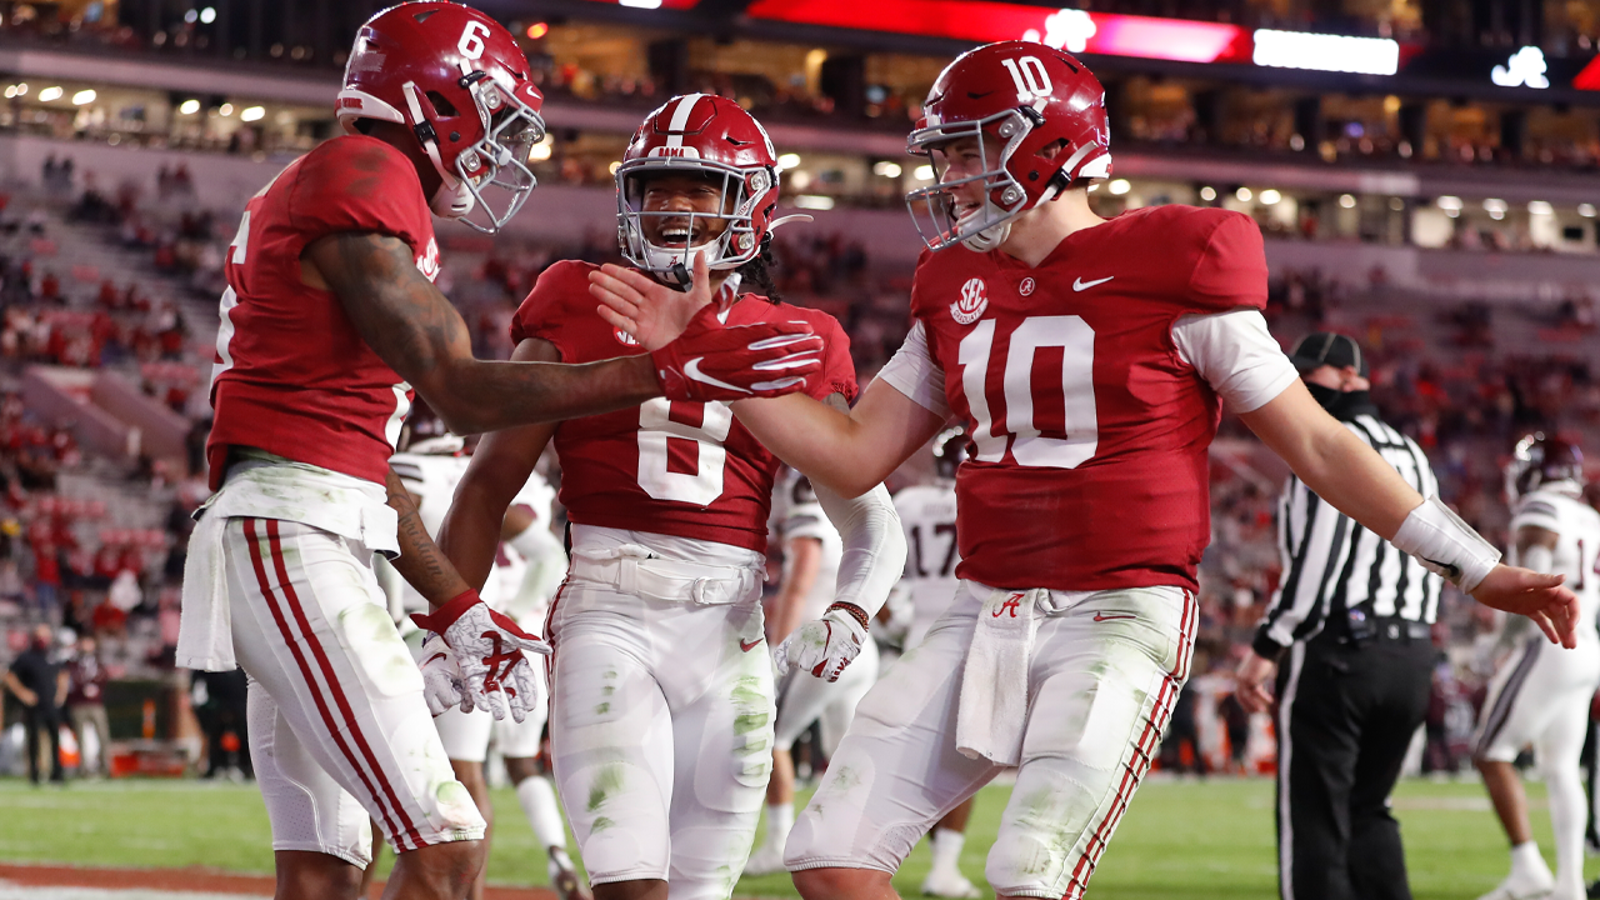 Alabama’s dominance is even more impressive considering COVID-19 | RJ Young | CFB on FOX